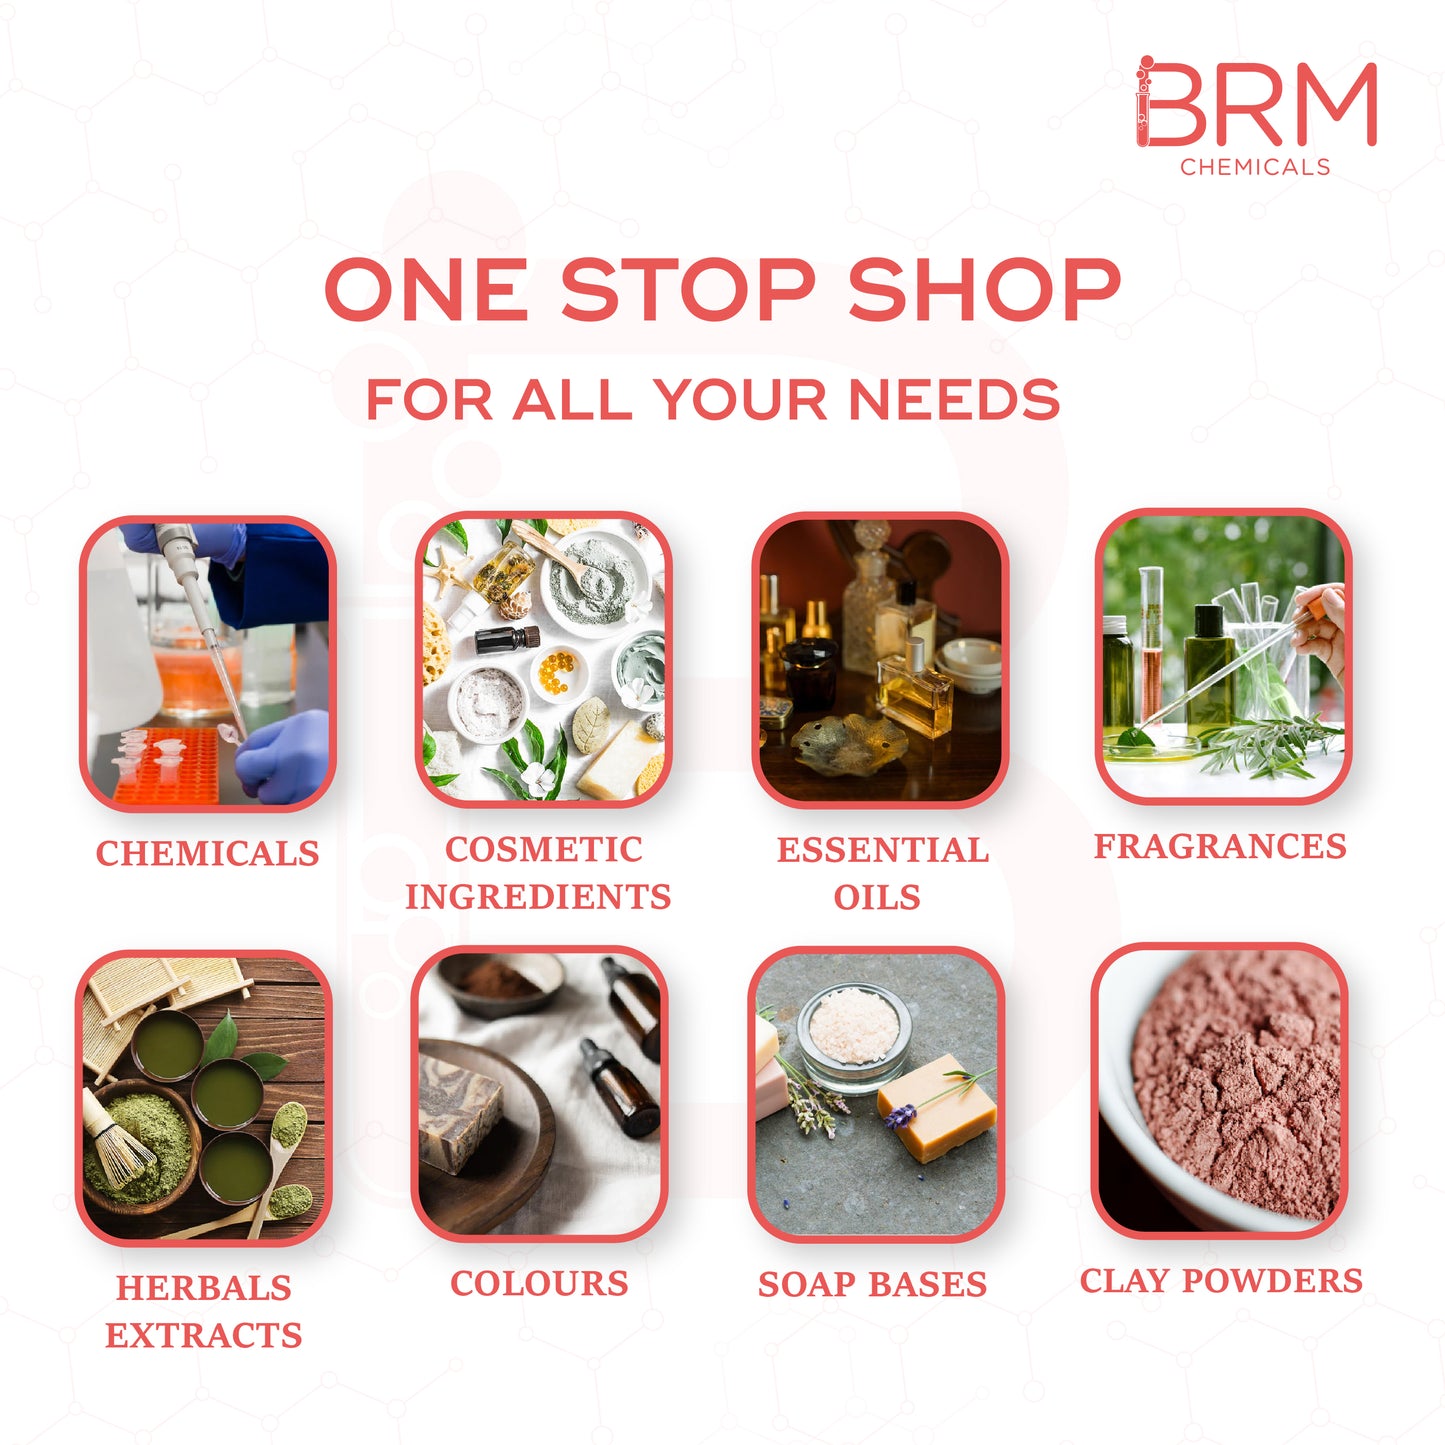 banner for BRM's one stop shop for Chemicals, cosmetic ingredients, essential oils, fragrances, herbals extracts, colours, soap bases, clay powders